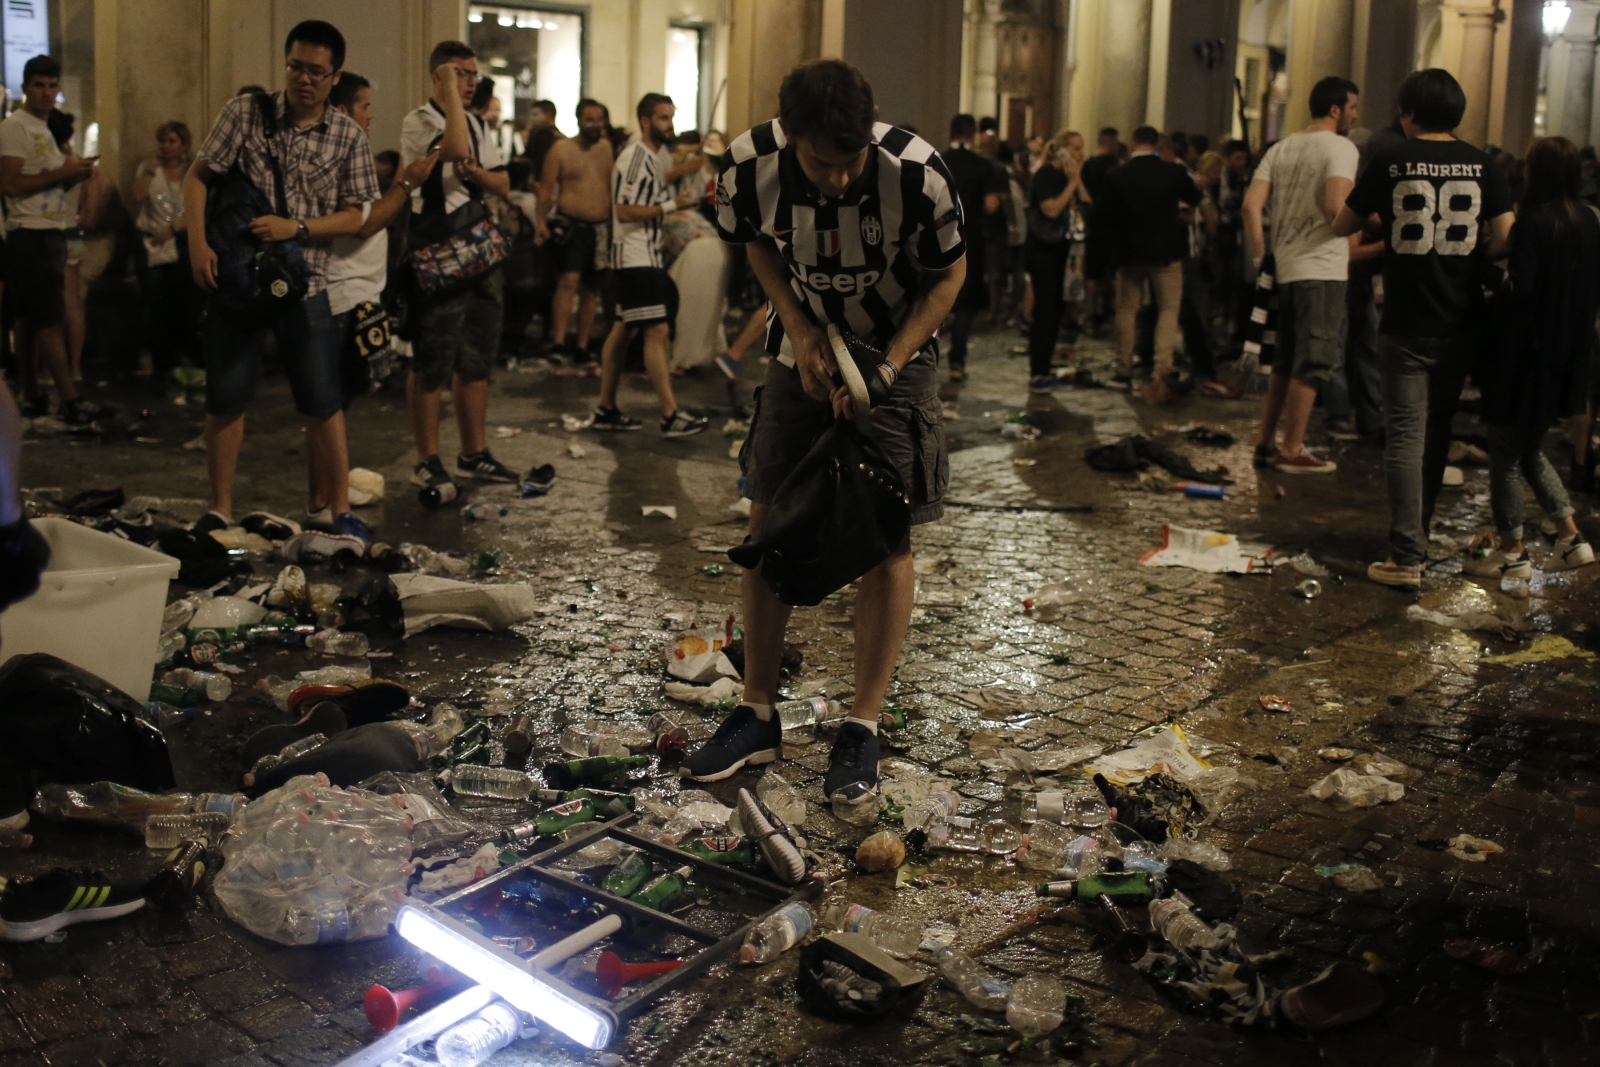 Hundreds of football fans injured during stampede in Italy's Turin after bomb scare